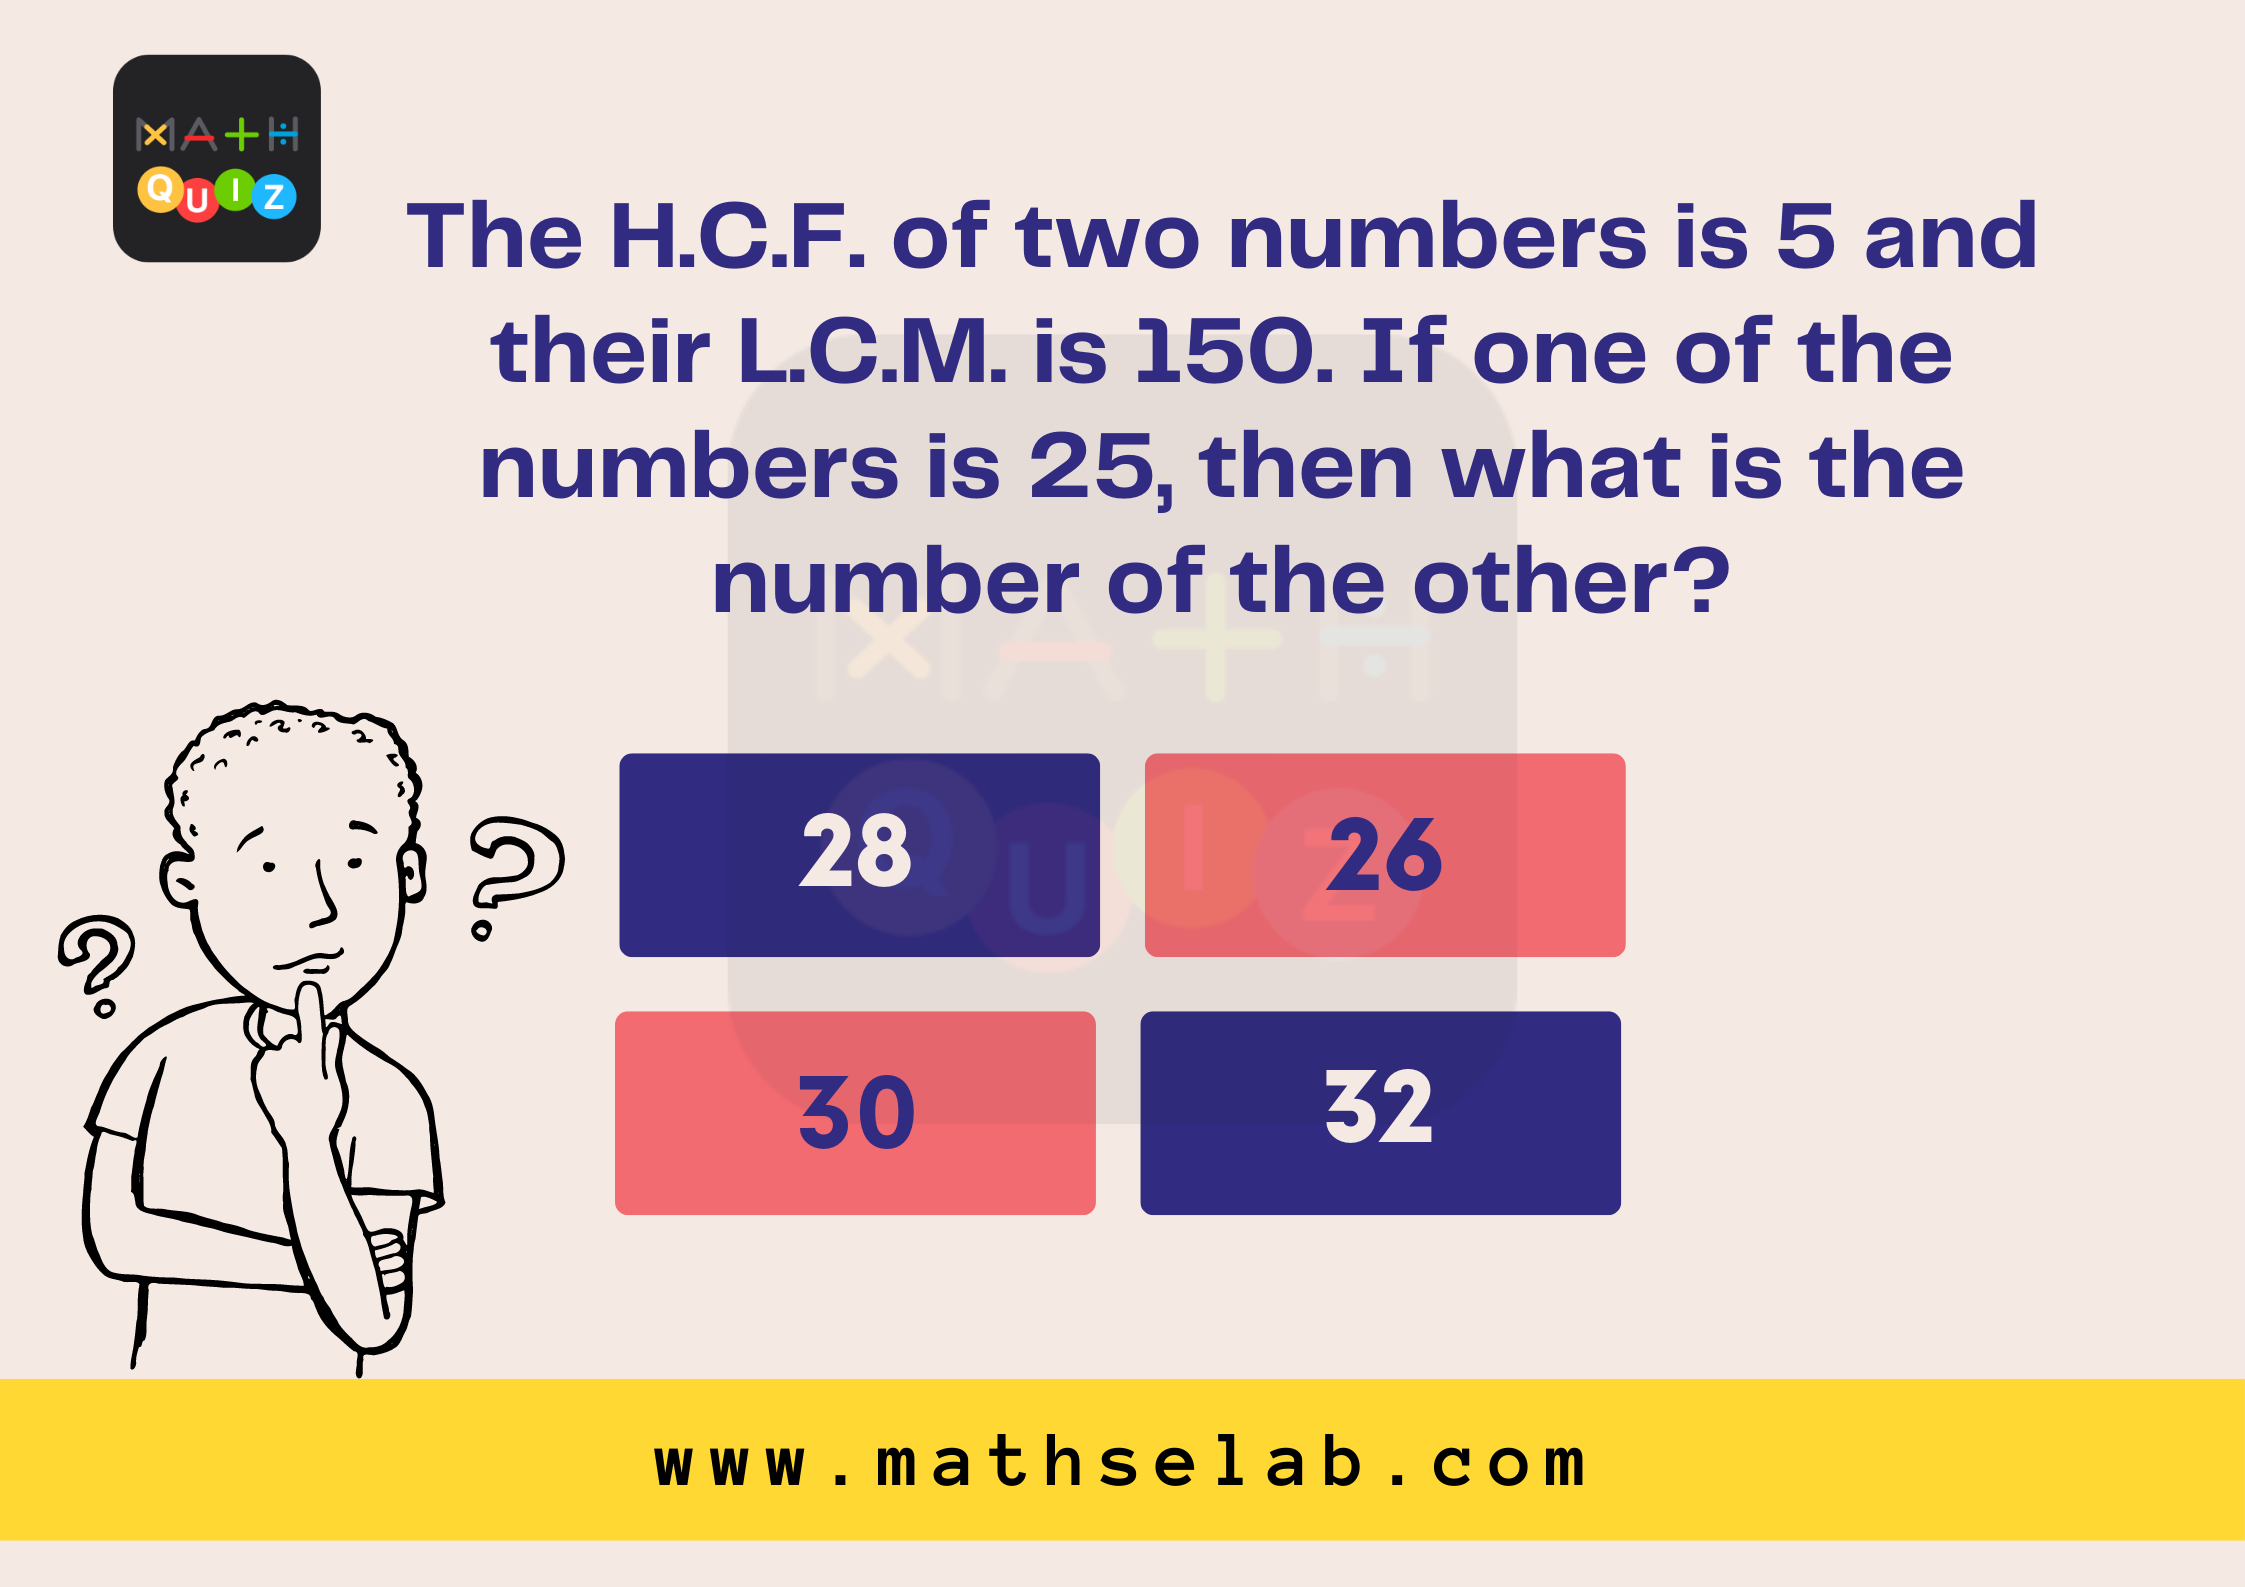 The H.C.F. of two numbers is 5 and their L.C.M. is 150. If one of the numbers is 25, then what is the number of the other?